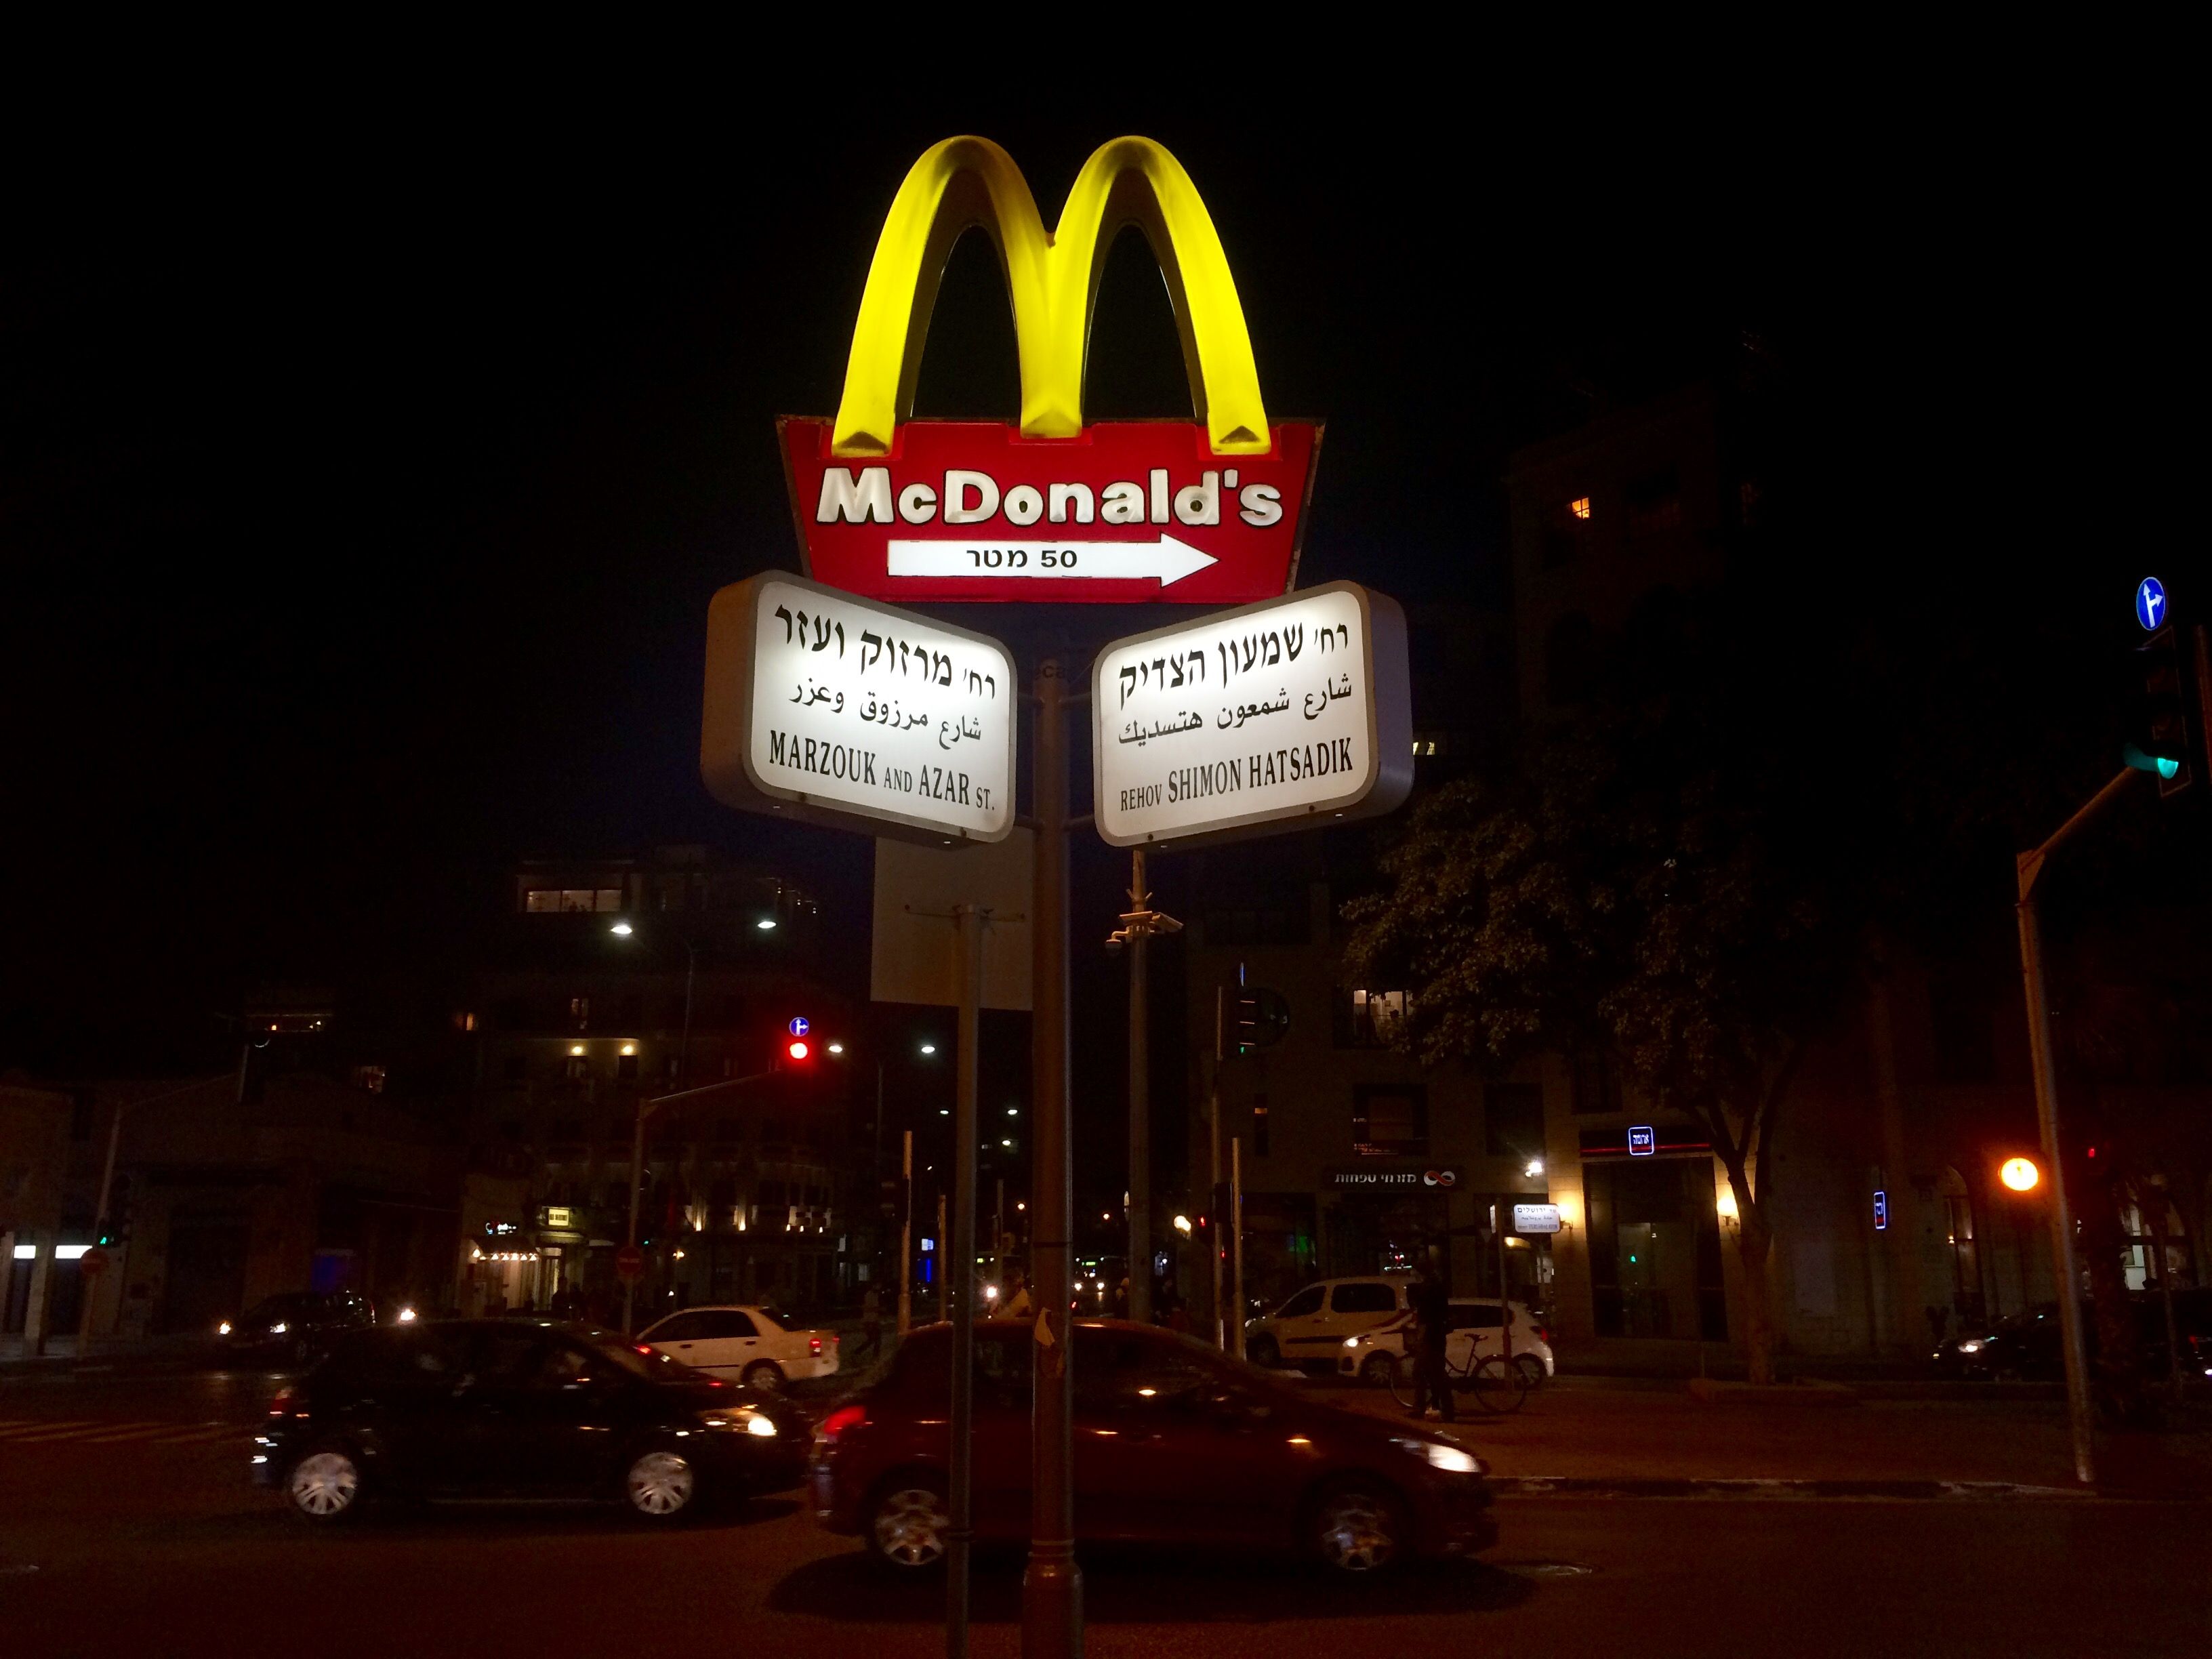 A sign for McDonald's in Tel Aviv, Israel. Image by Miriam Berger. Israel, 2017.